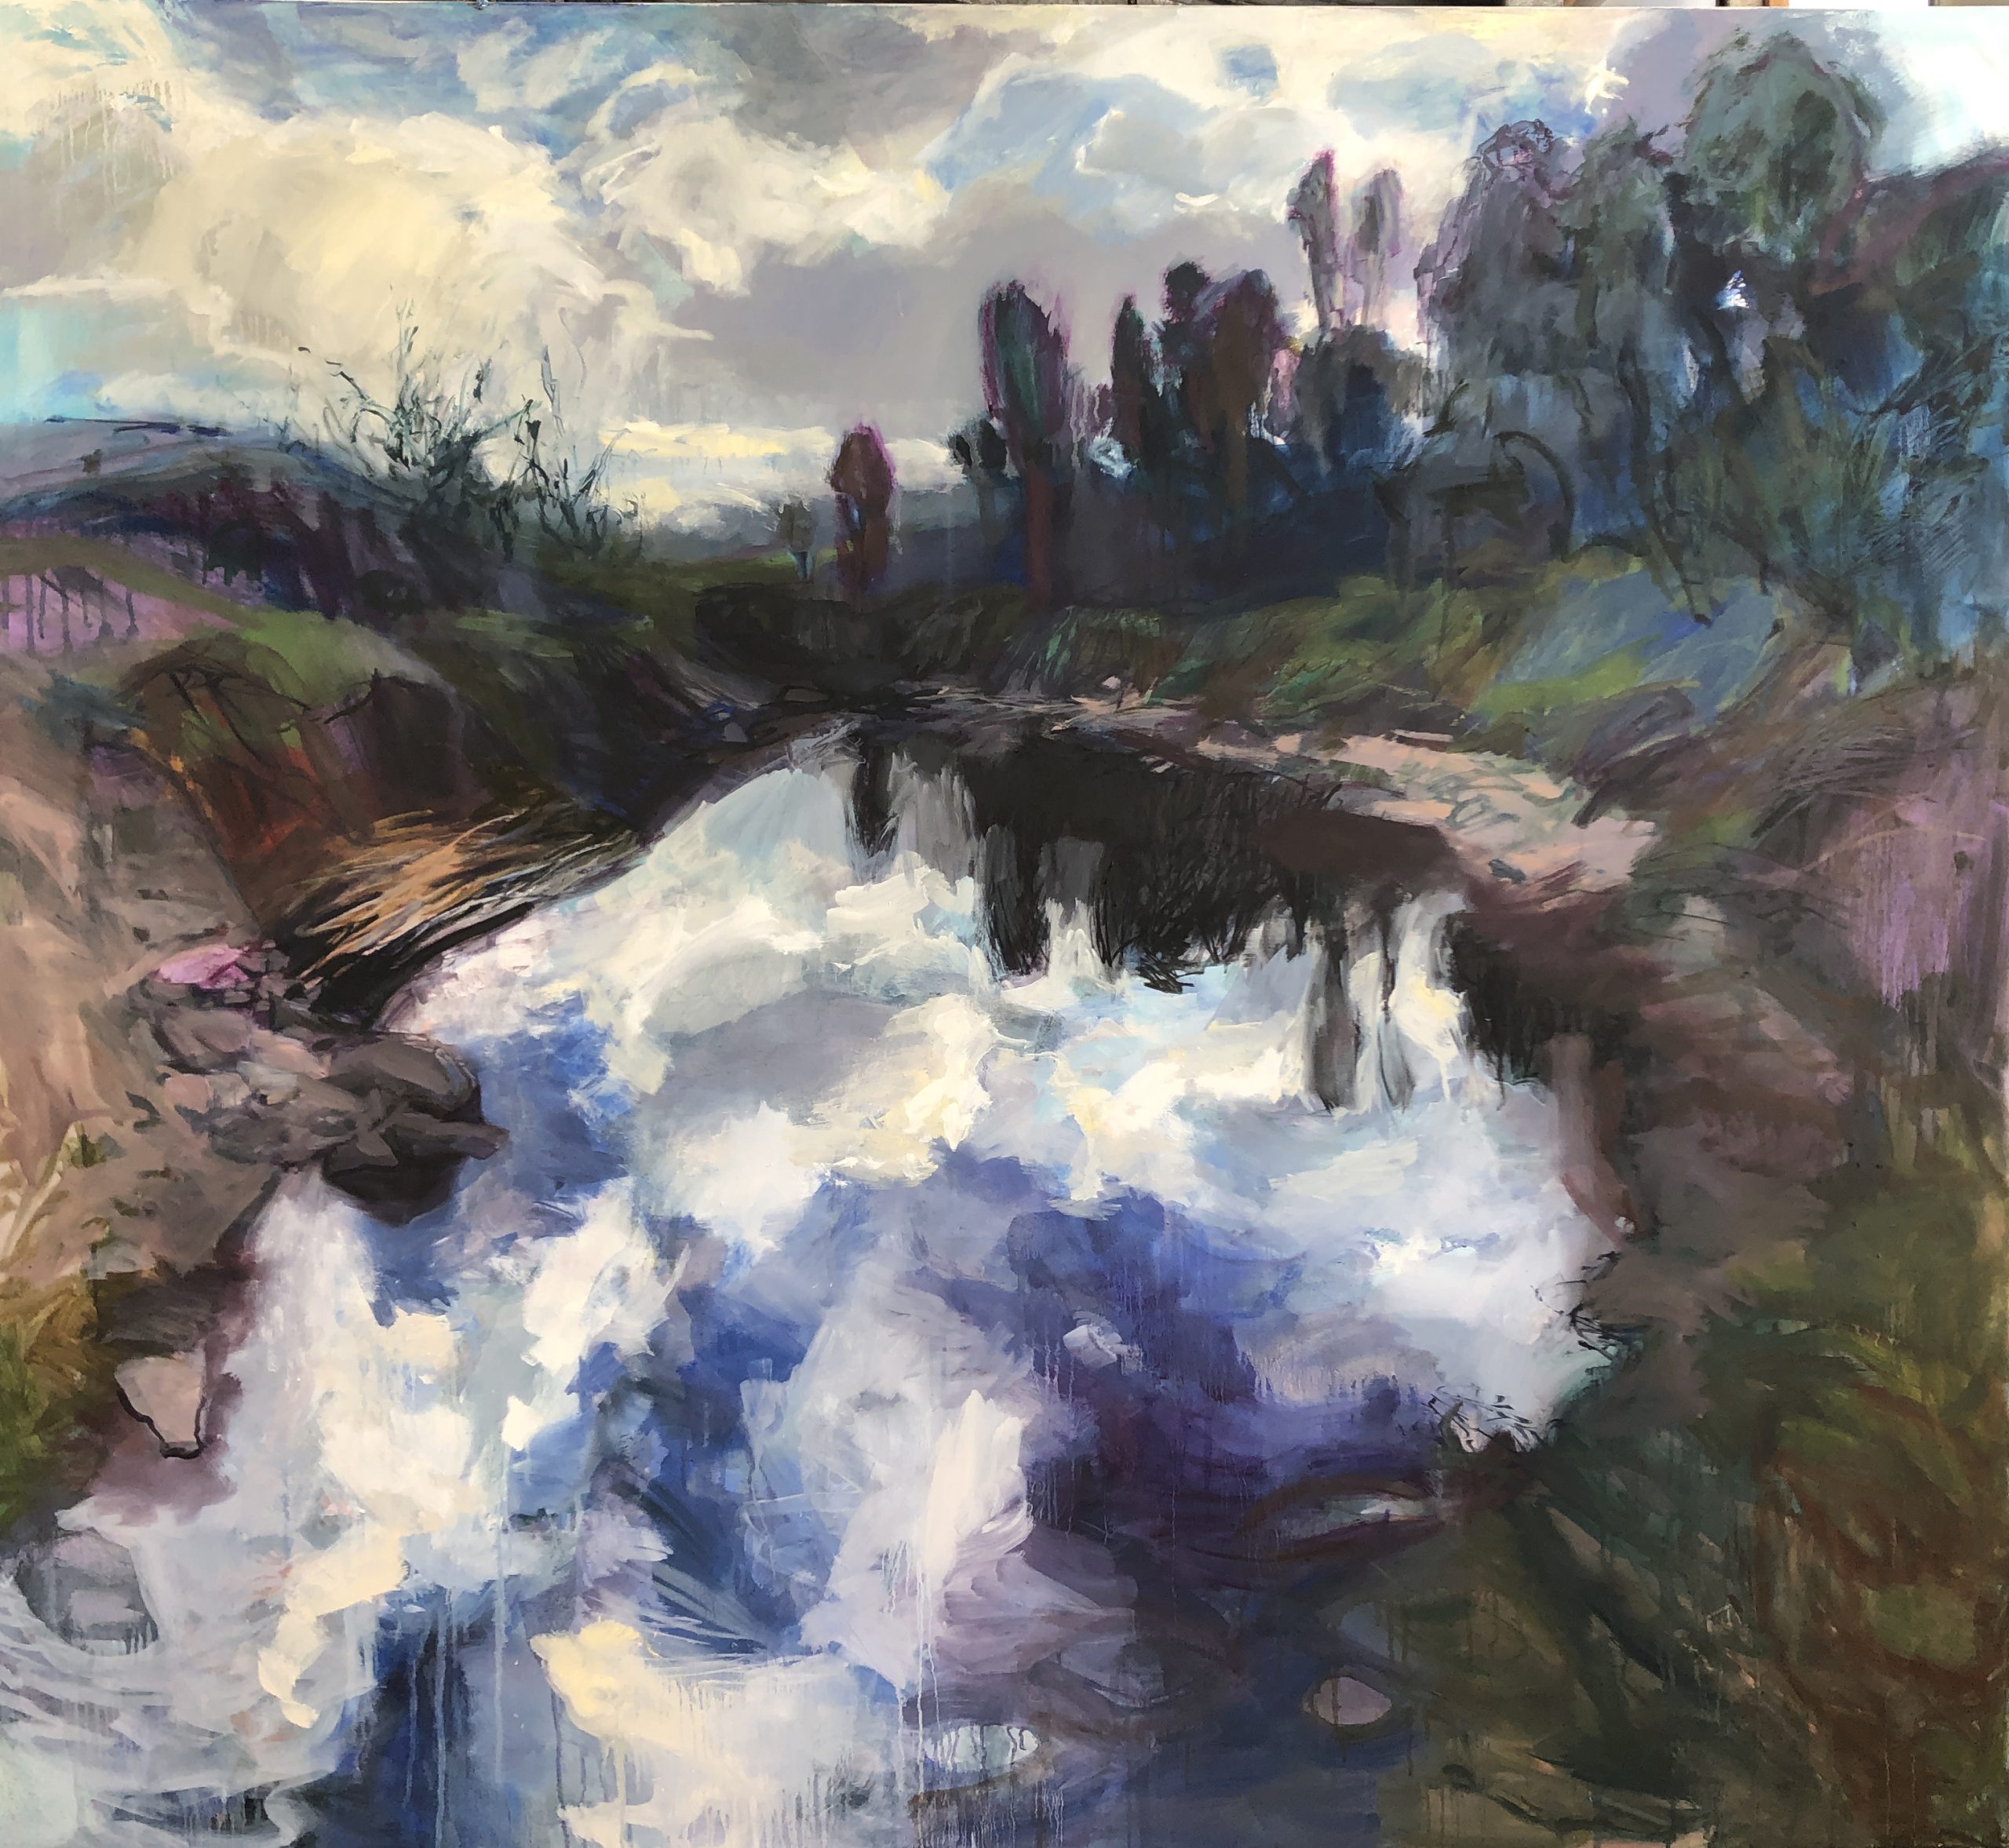 McInnis_Cloudy Day, Whiskers Creek_Oil on Canvas_152x168cm_master